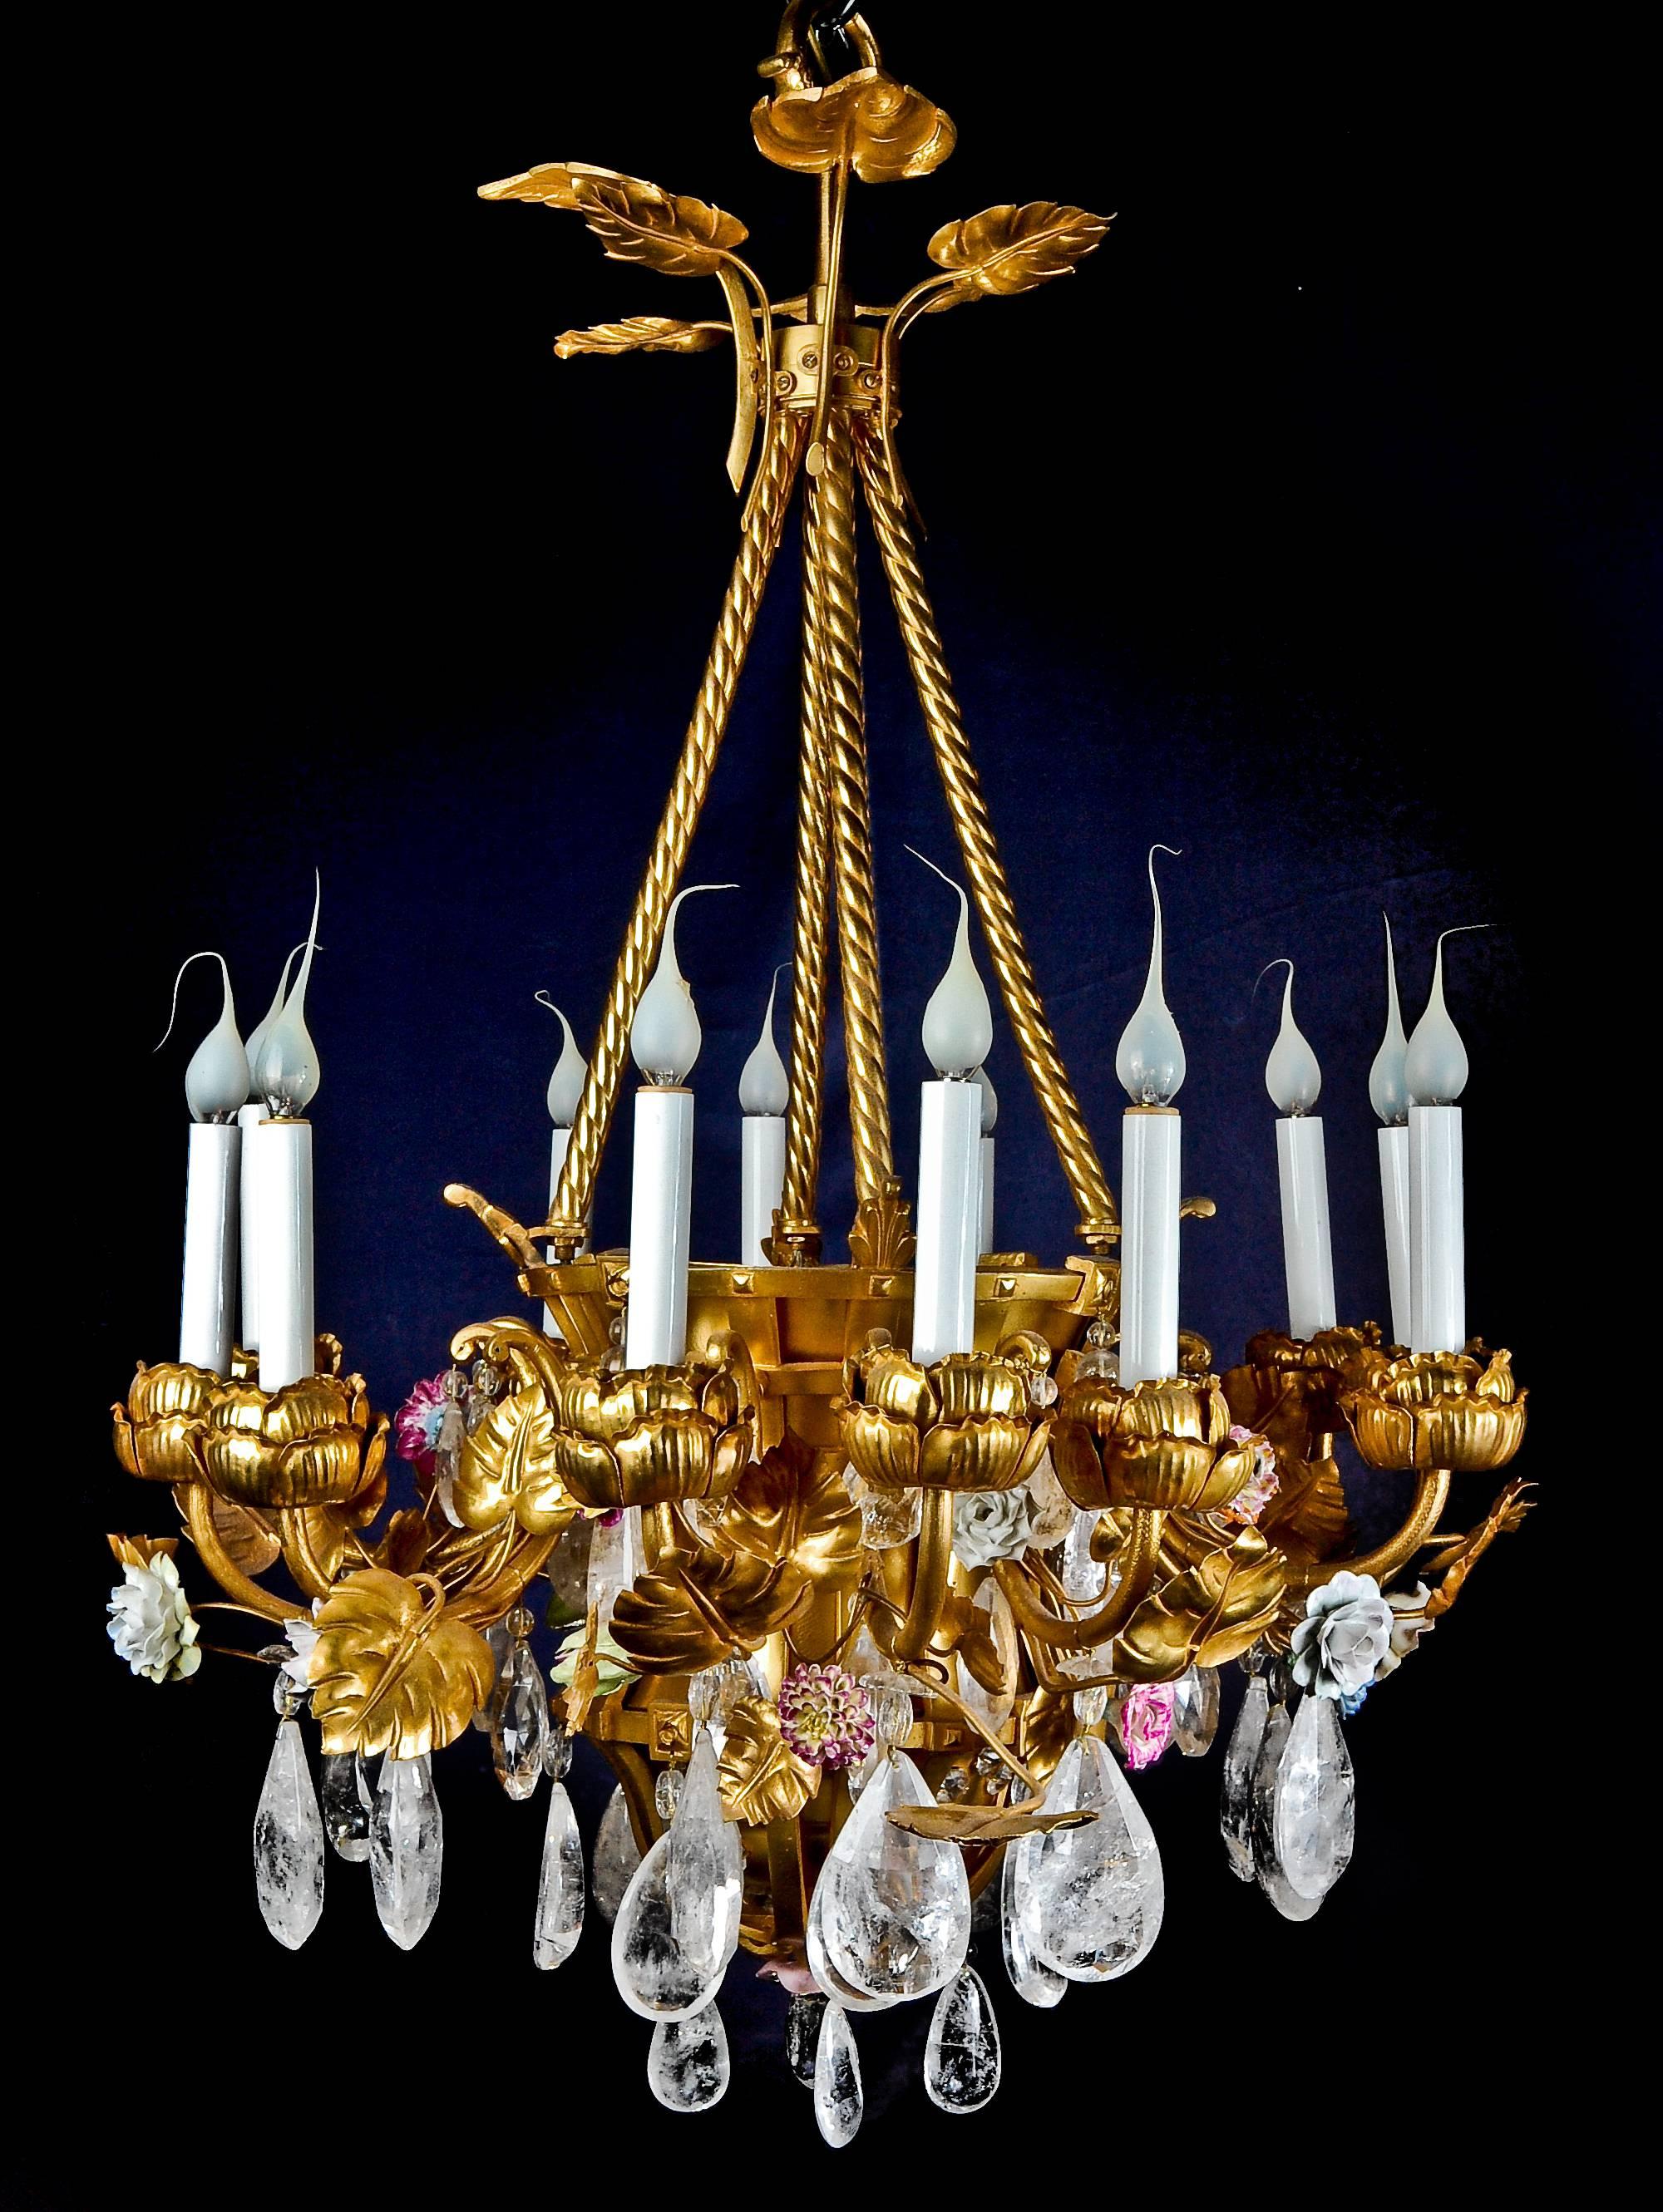 A unique antique French Louis XVI style gilt bronze, porcelain and rock crystal multi light basket form chandelier of superb craftsmanship. This unusual chandelier is embellished with gilt bronze flowers, polychromed porcelain flowers and further